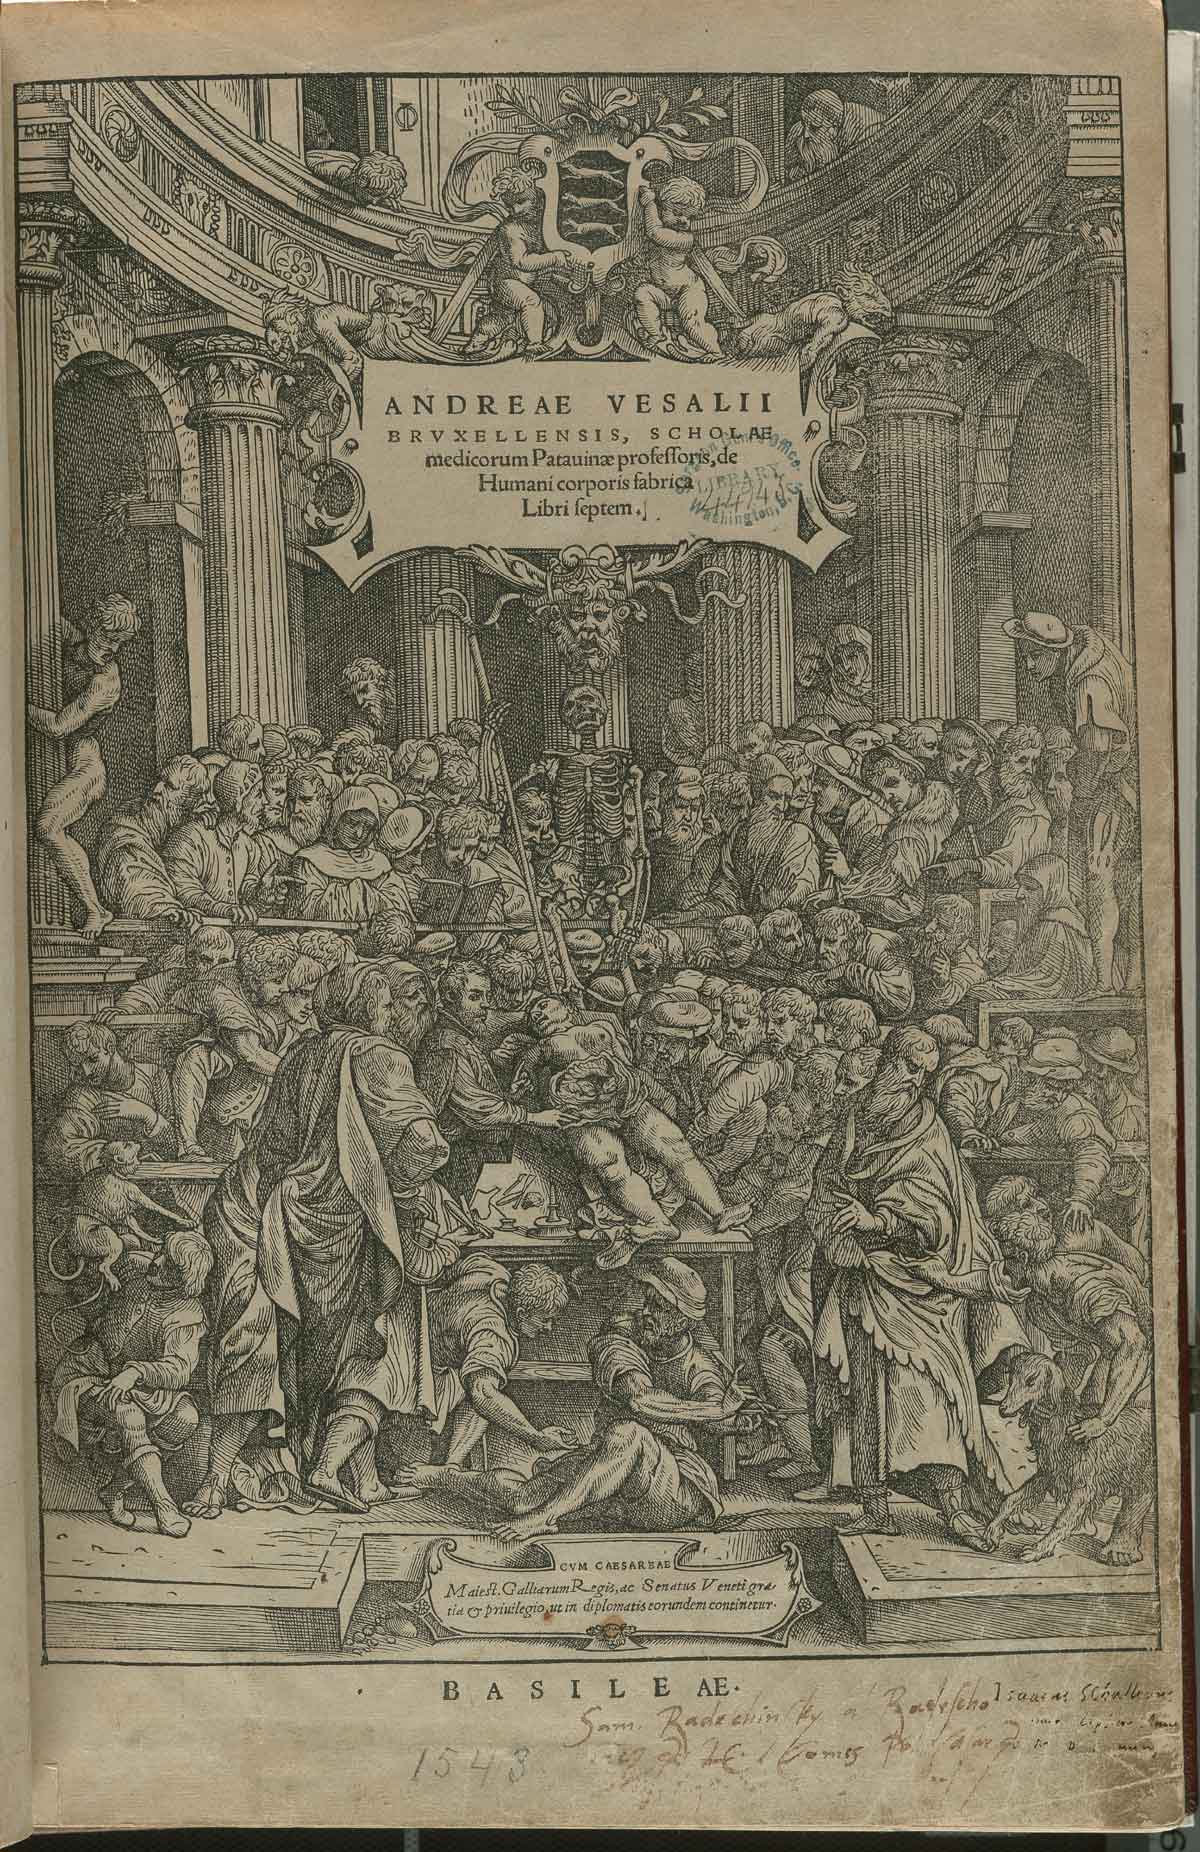 The titlepage of Andreas Vesalius' De corporis humani fabrica libri septem, featuring Vesalius performing a dissection in a crowded anatomical theatre. There are previous ownership signatures of Sam. Redeschinsky à Radescho and Isaacus Schallerus on the bottom right corner.